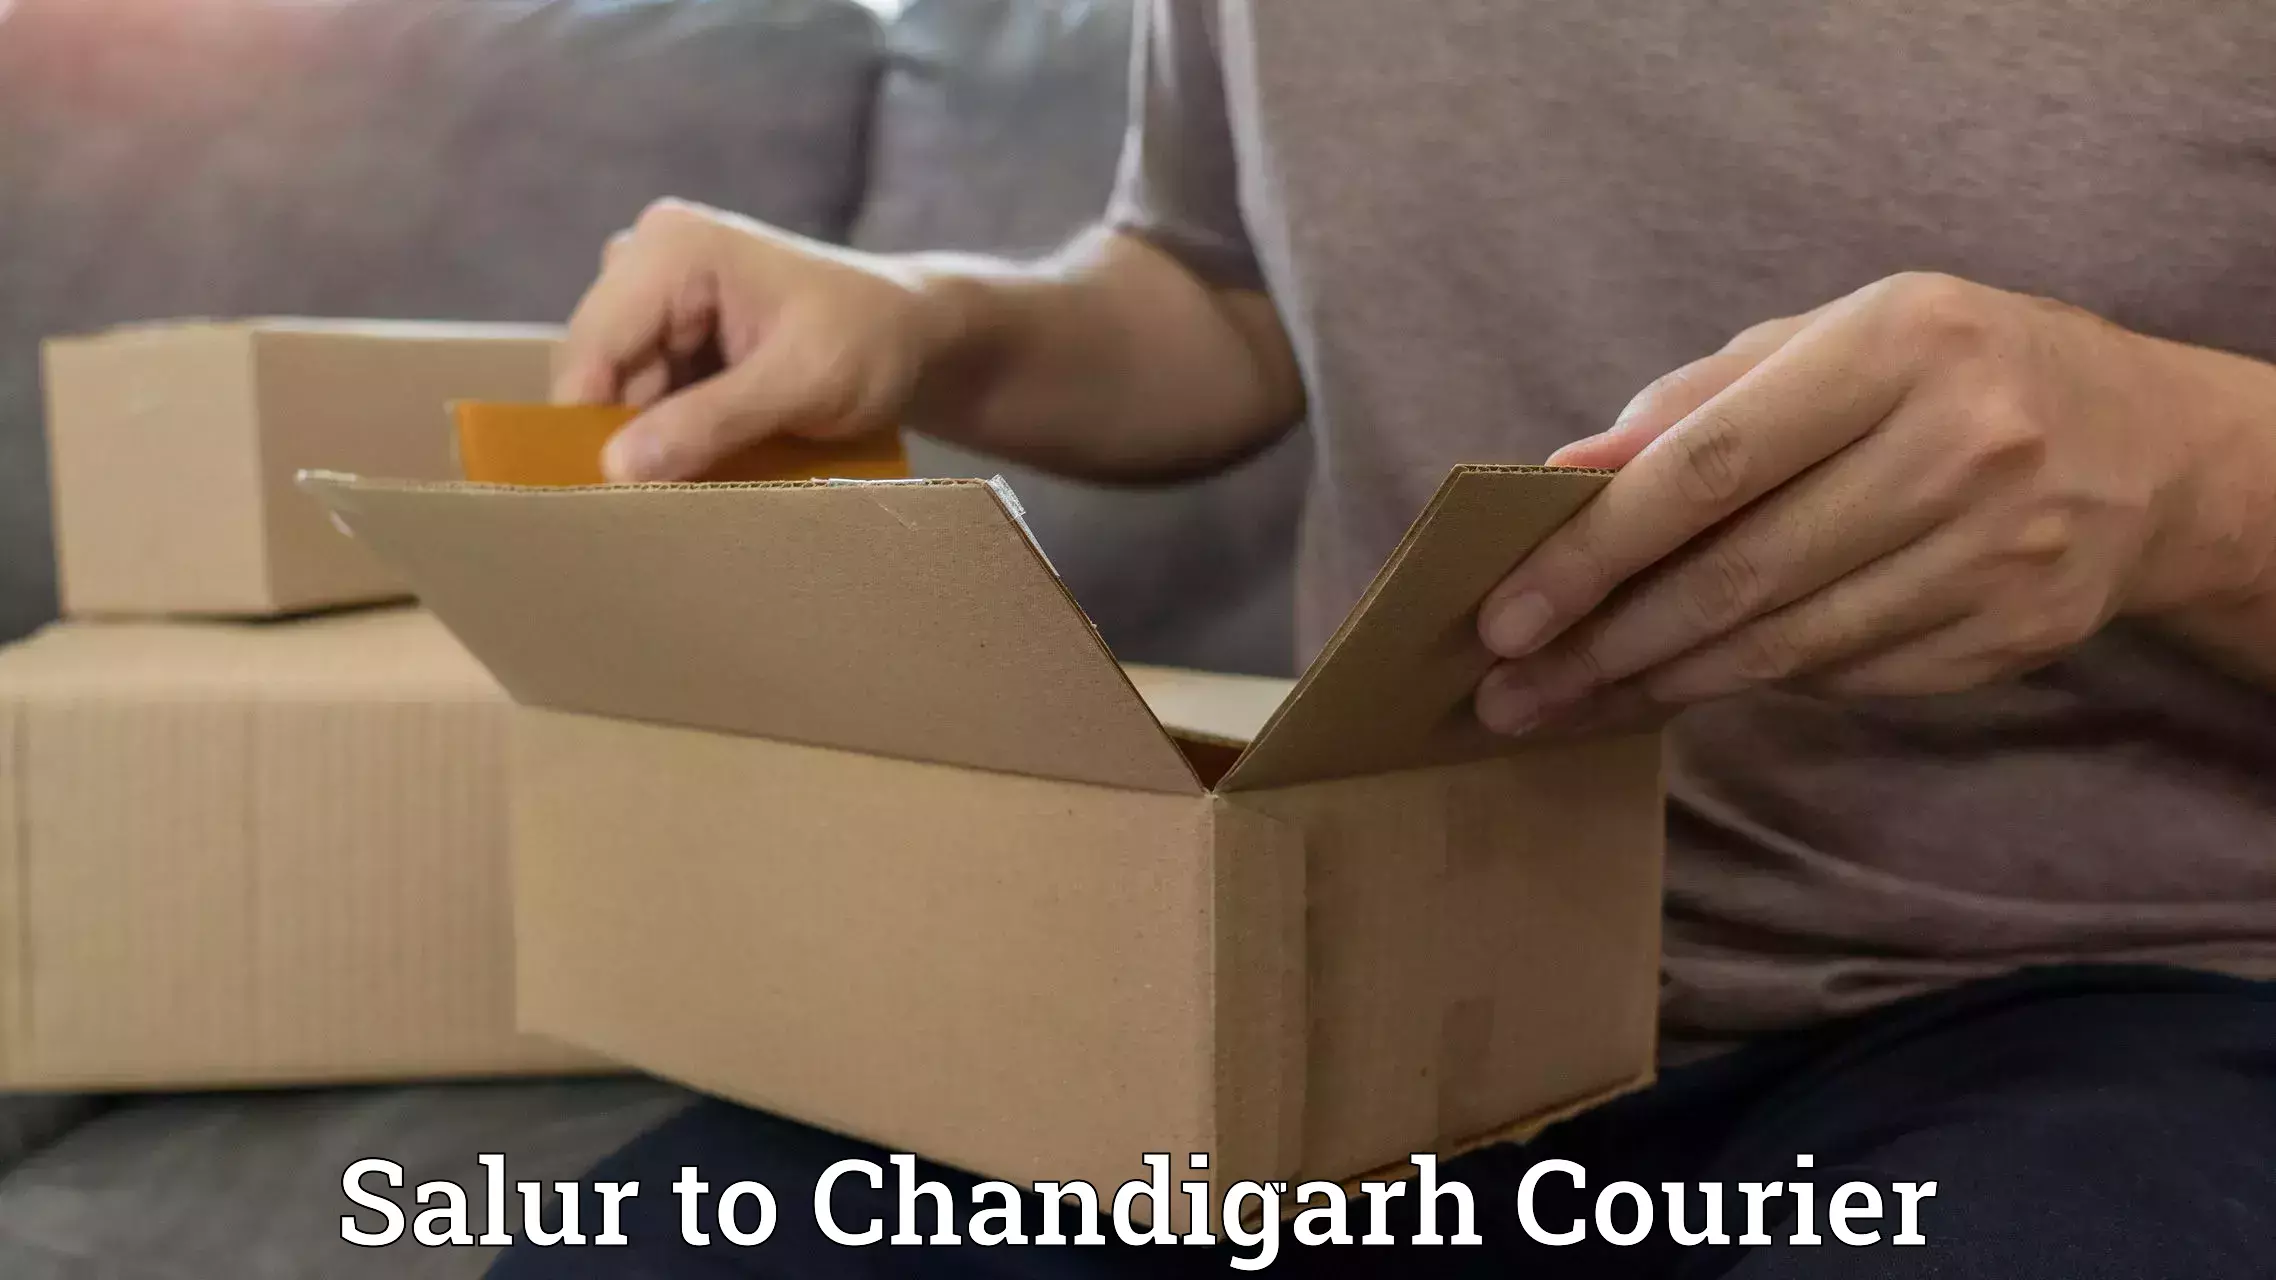 Business delivery service Salur to Panjab University Chandigarh